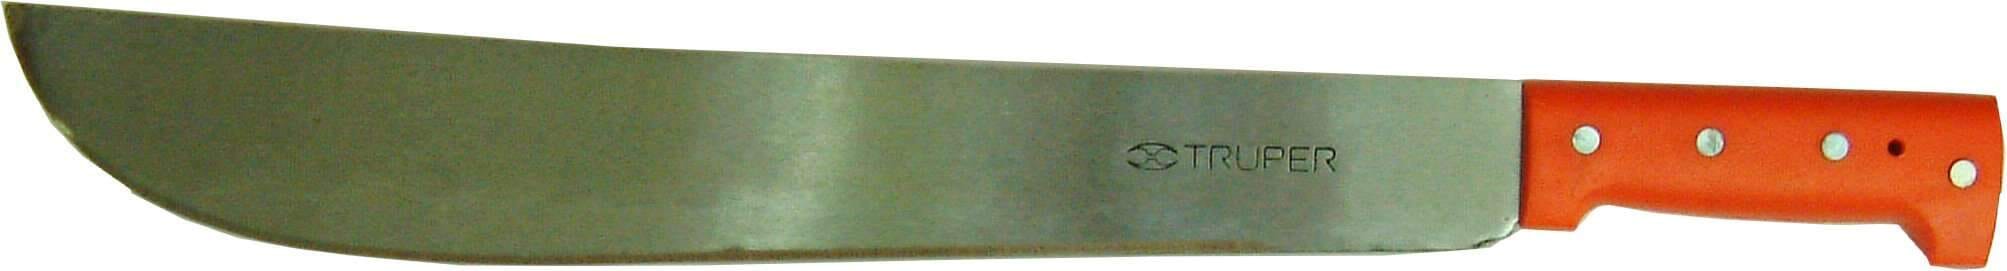 Truper Machette with Rivetted Handle 450mm